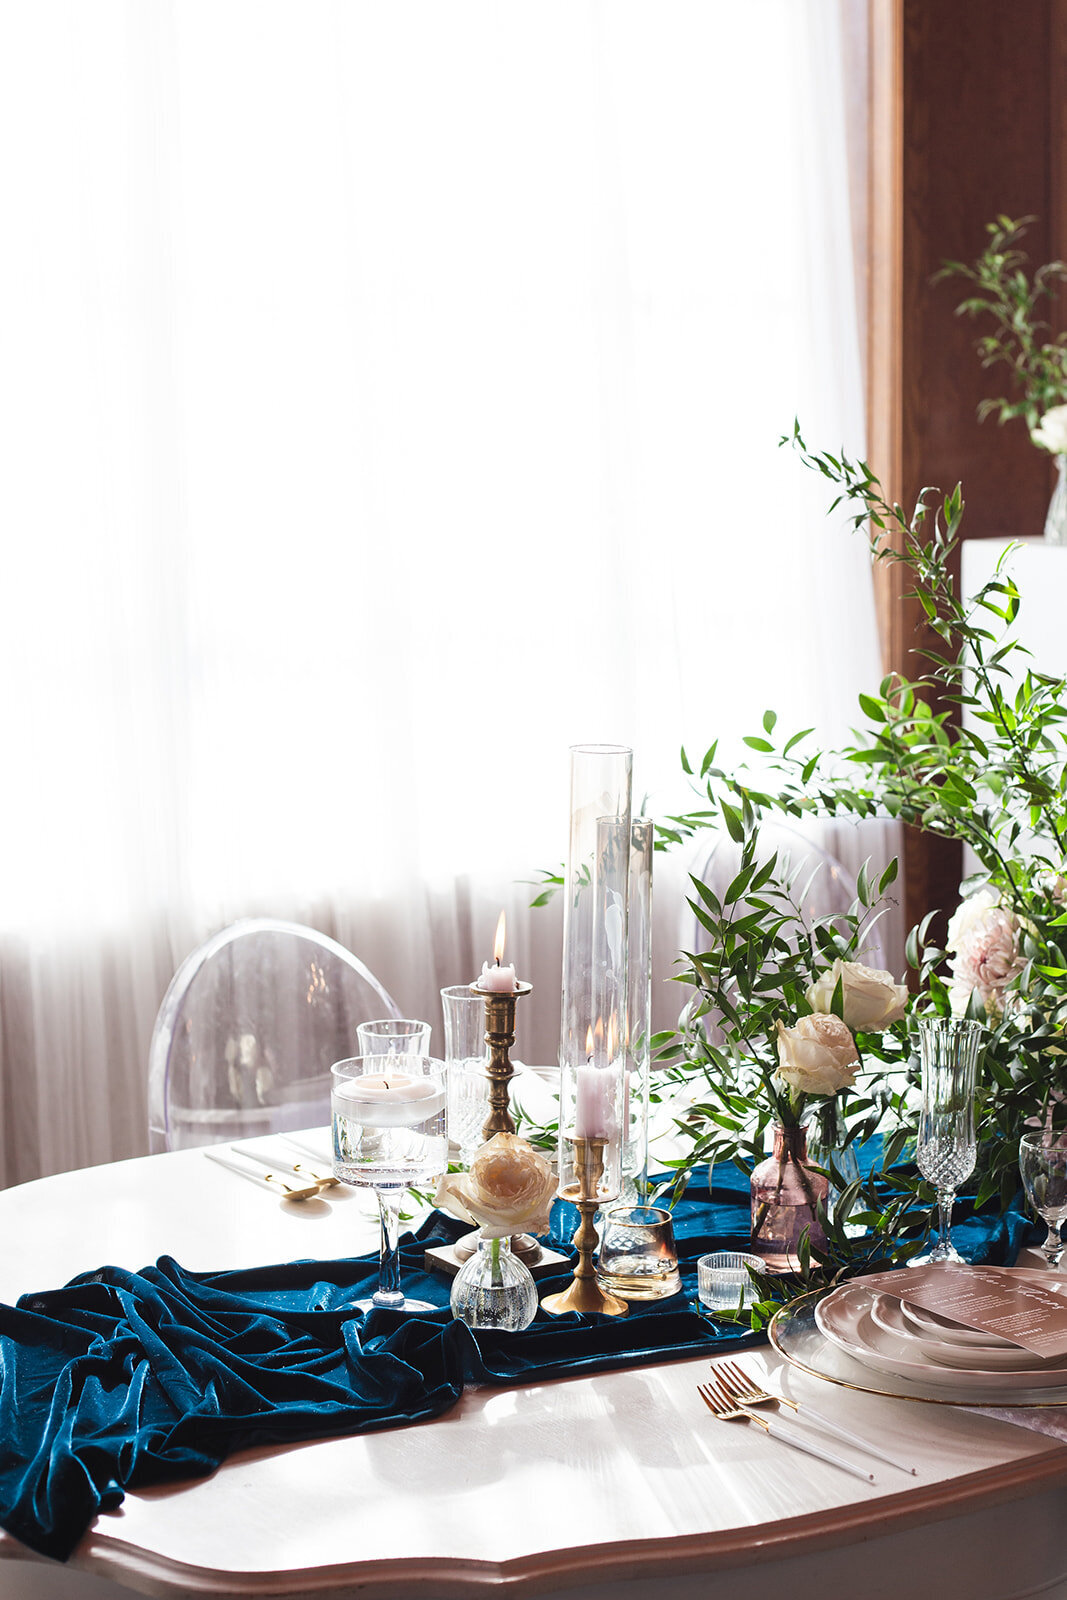 teal table runner with greenery and candles